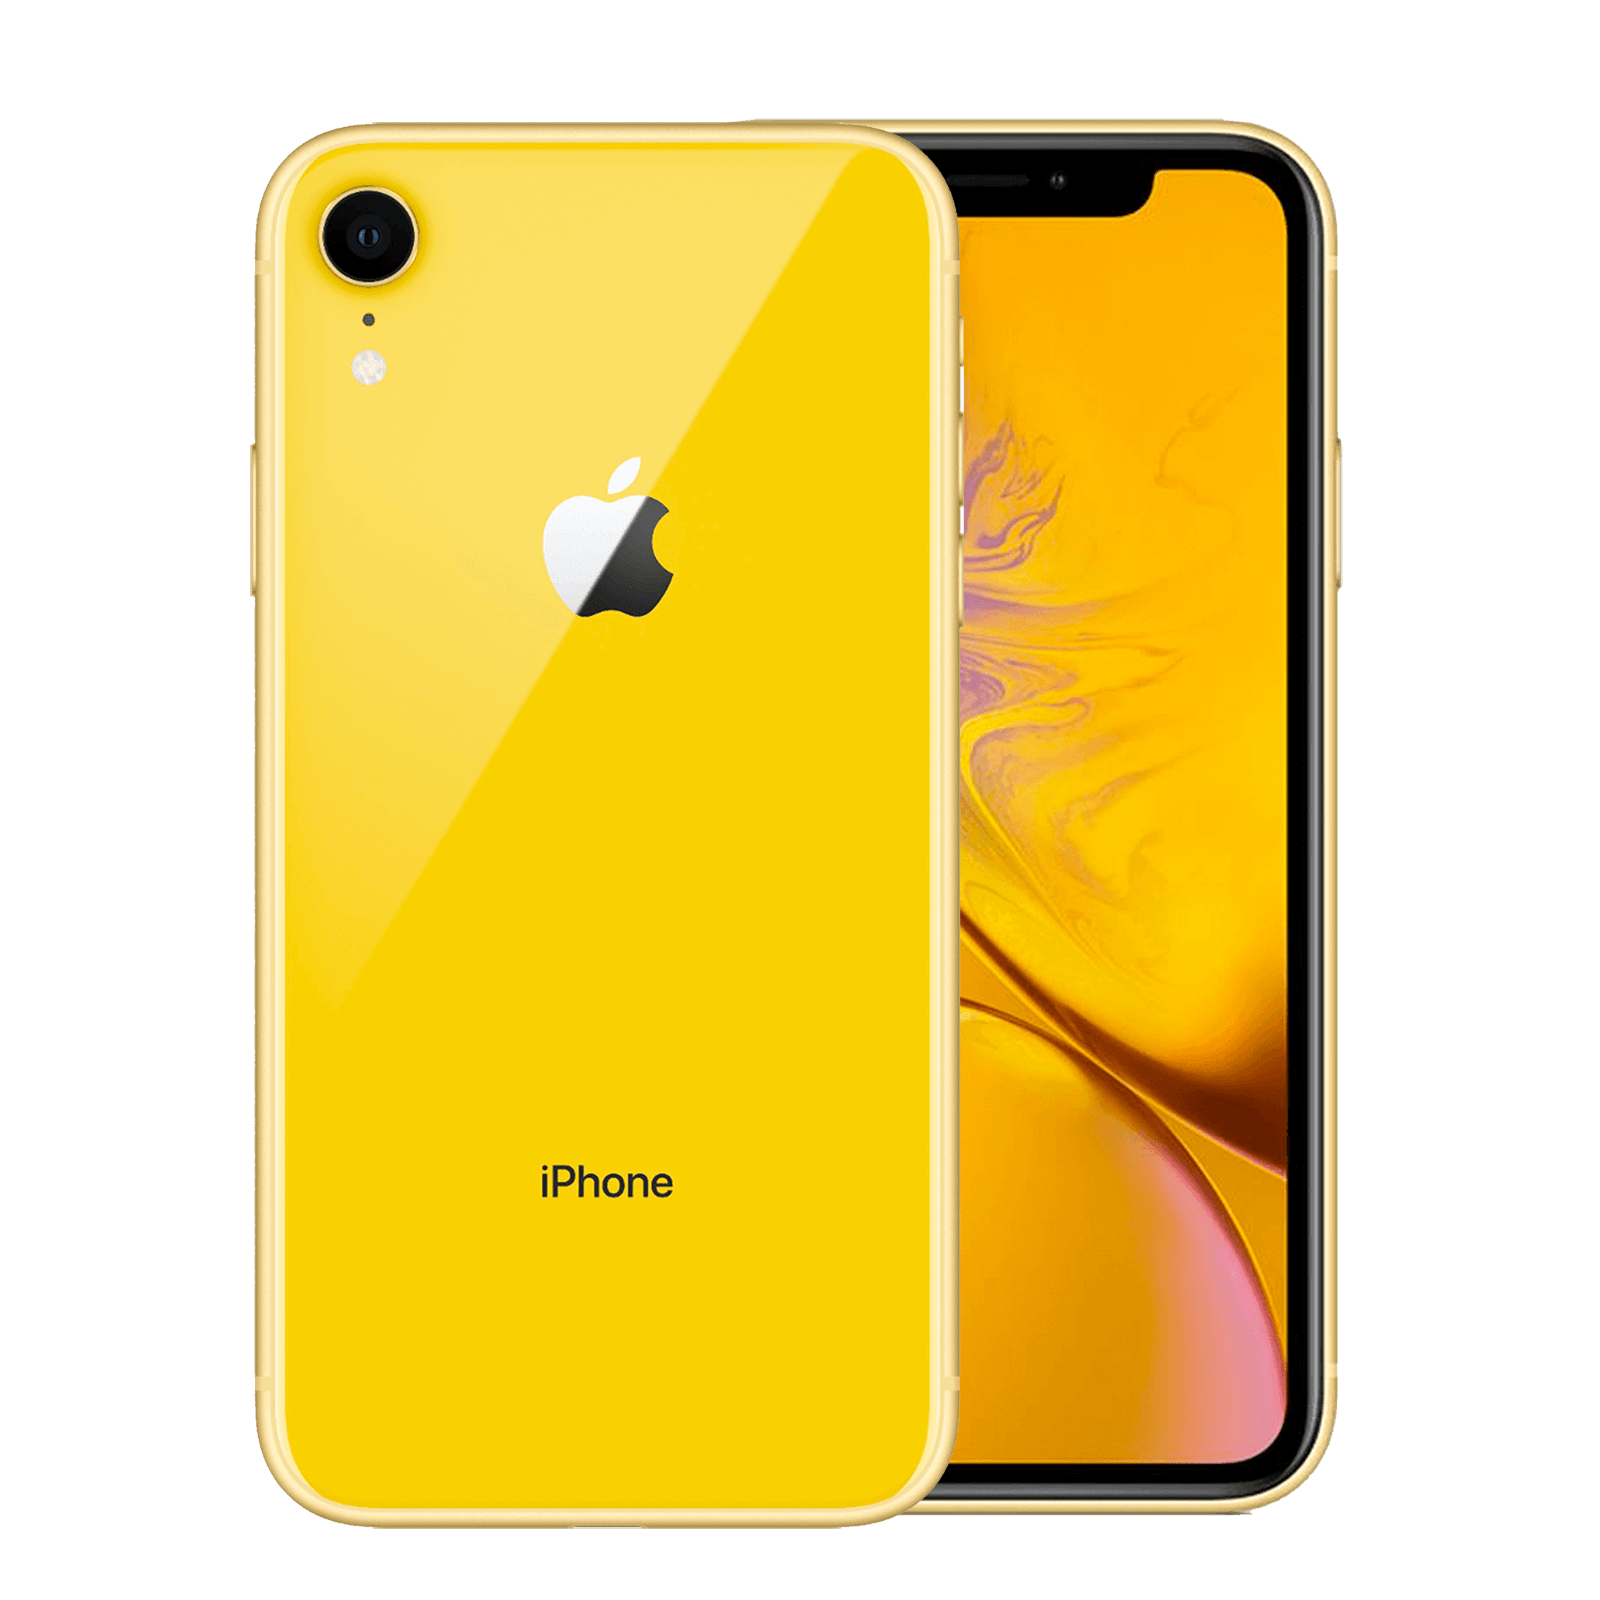 Apple iPhone XR 256GB Yellow Very Good - T-Mobile